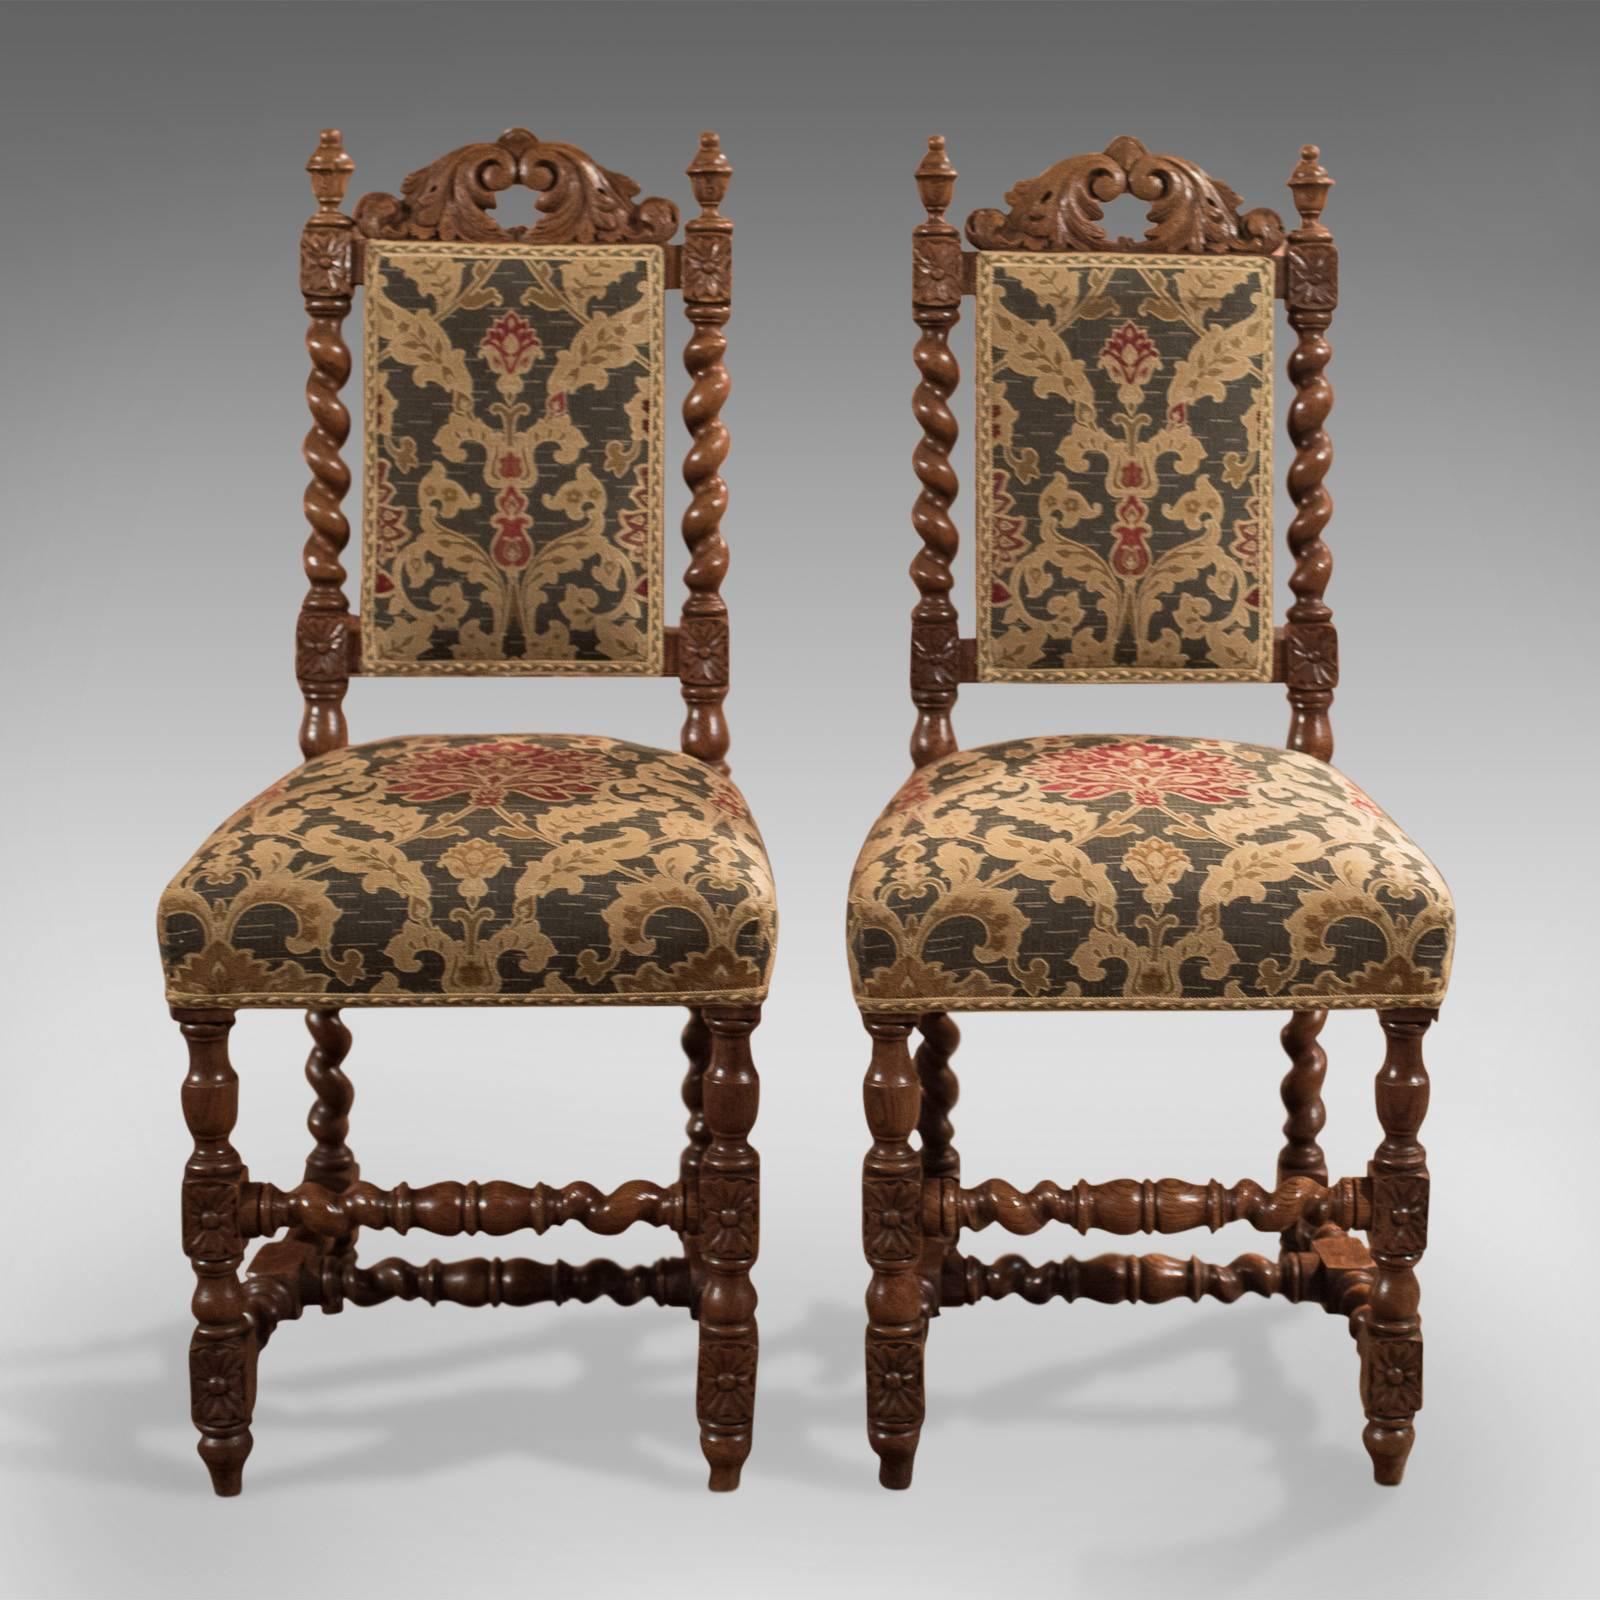 This is a super pair of antique hall chairs dating to the mid-Victorian period, circa 1870.

In English oak with warm tones and an aged patina
Raised on tulip feet, front legs vase turned
Turned, barley twist rear legs and stretcher
Boxed